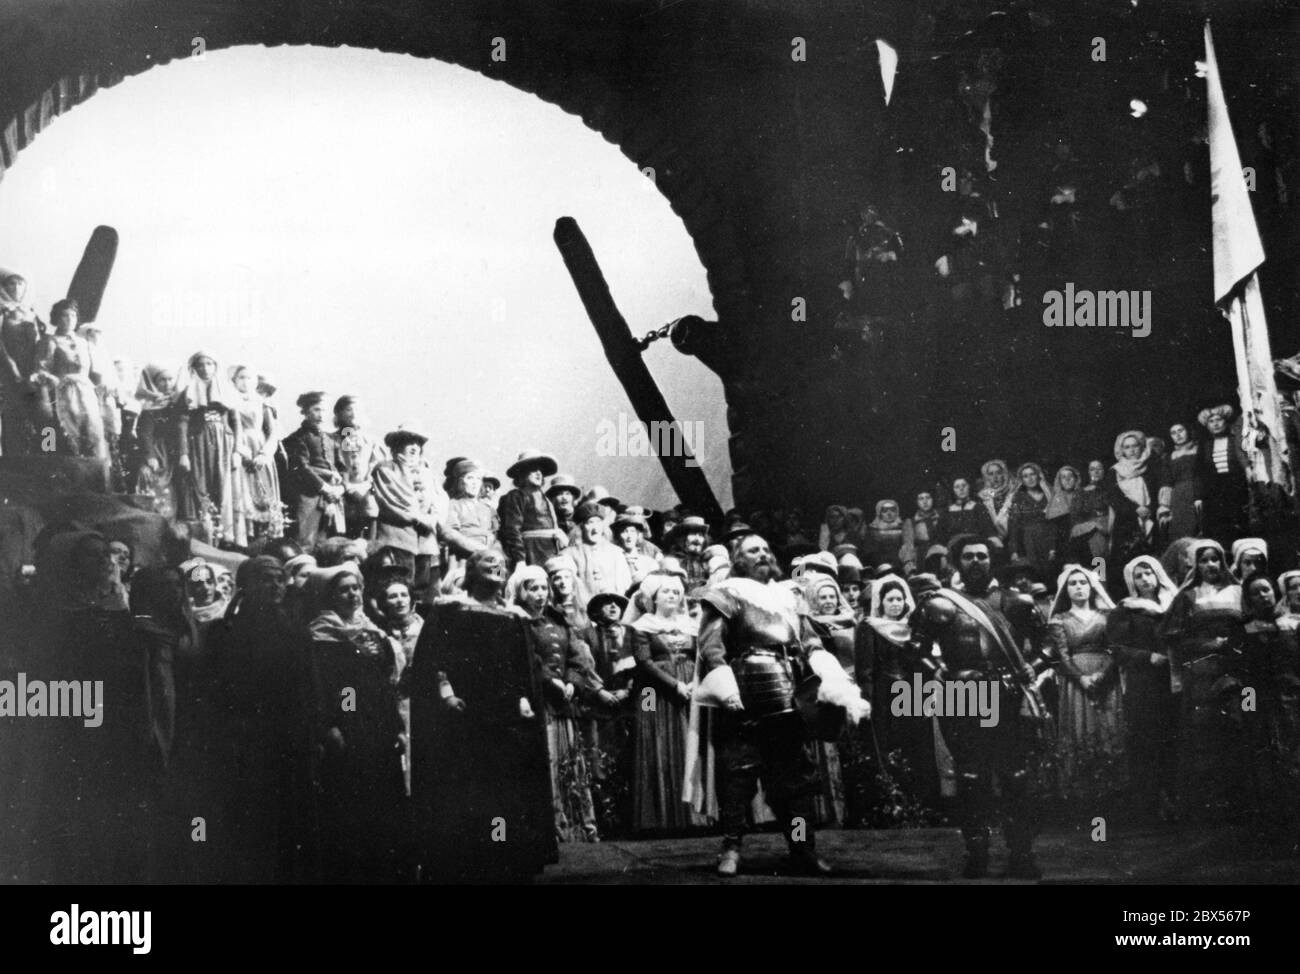 Closing photo of the opera 'Friedenstag' (Peace Day) by composer Richard Strauss at the Staatsoper 'Unter den Linden' in Berlin. Stock Photo